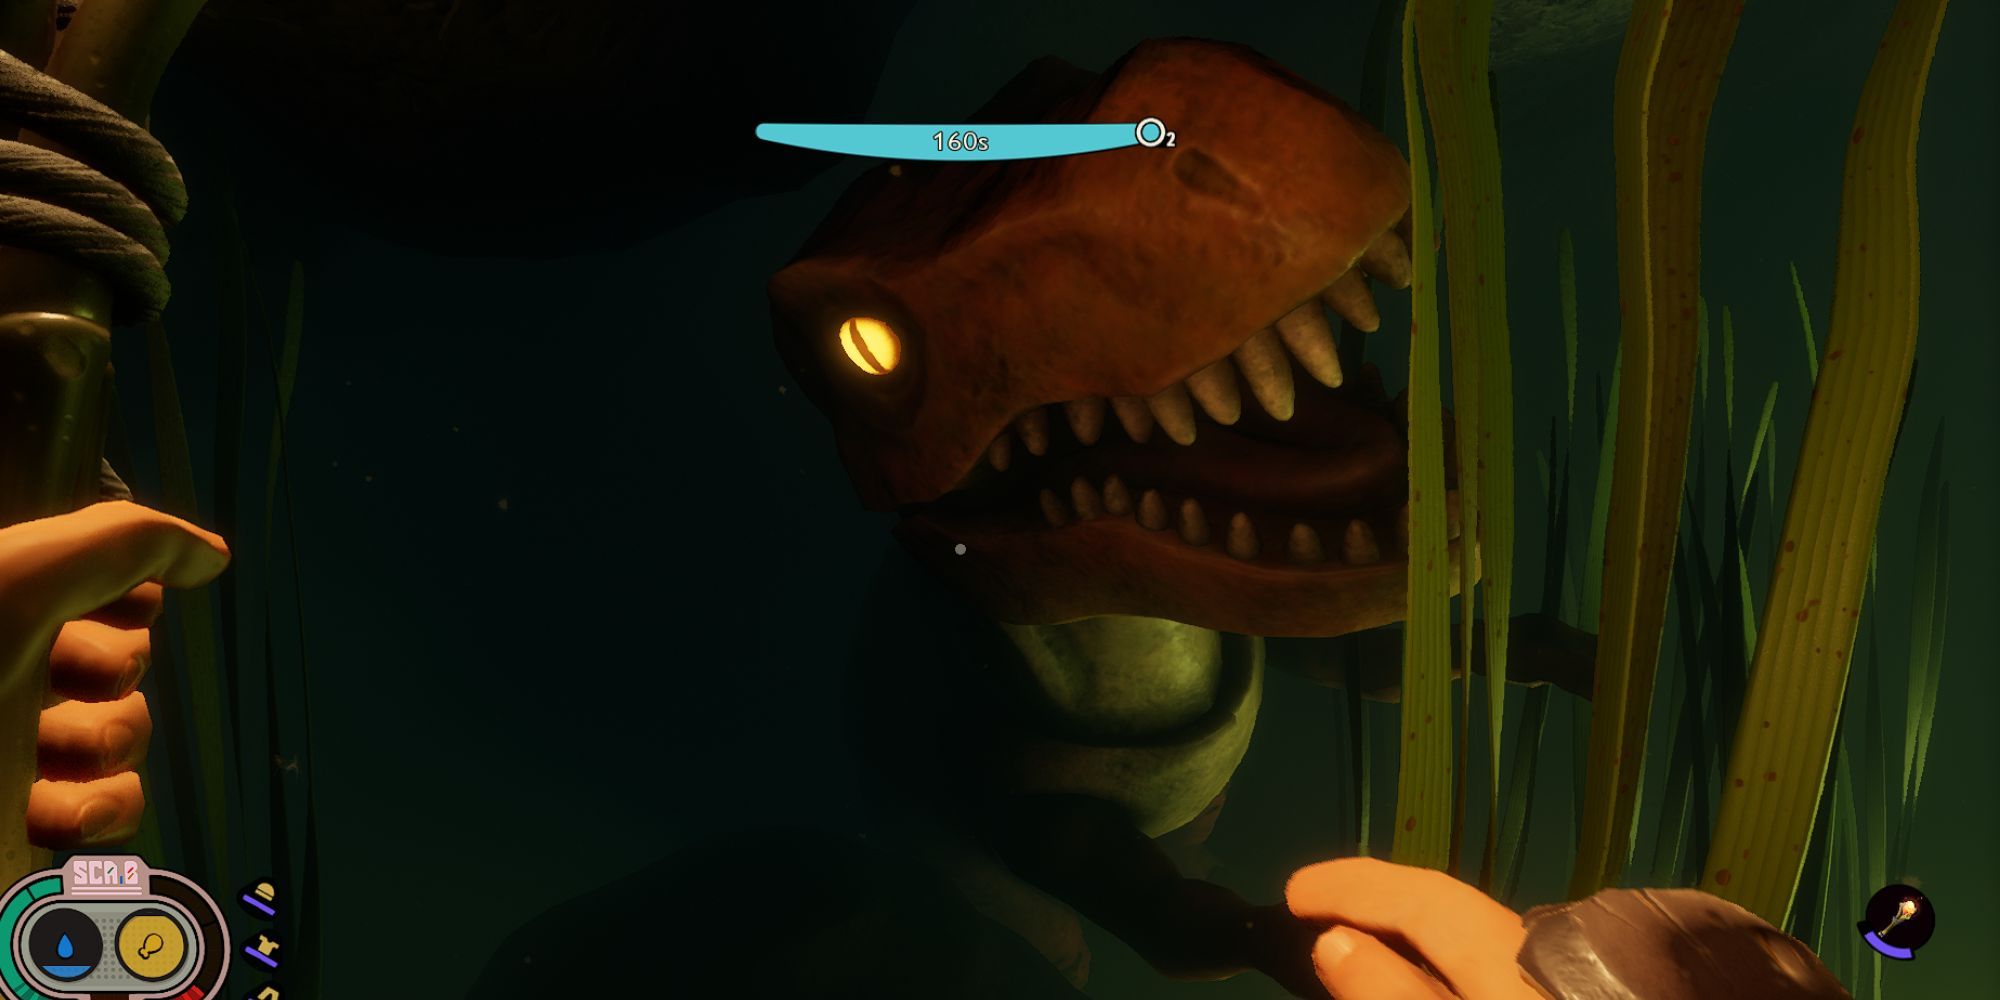 A submerged toy T-Rex with open mouth and glowing eyes is stuck at the bottom of a pond surrounded by darkness and grass